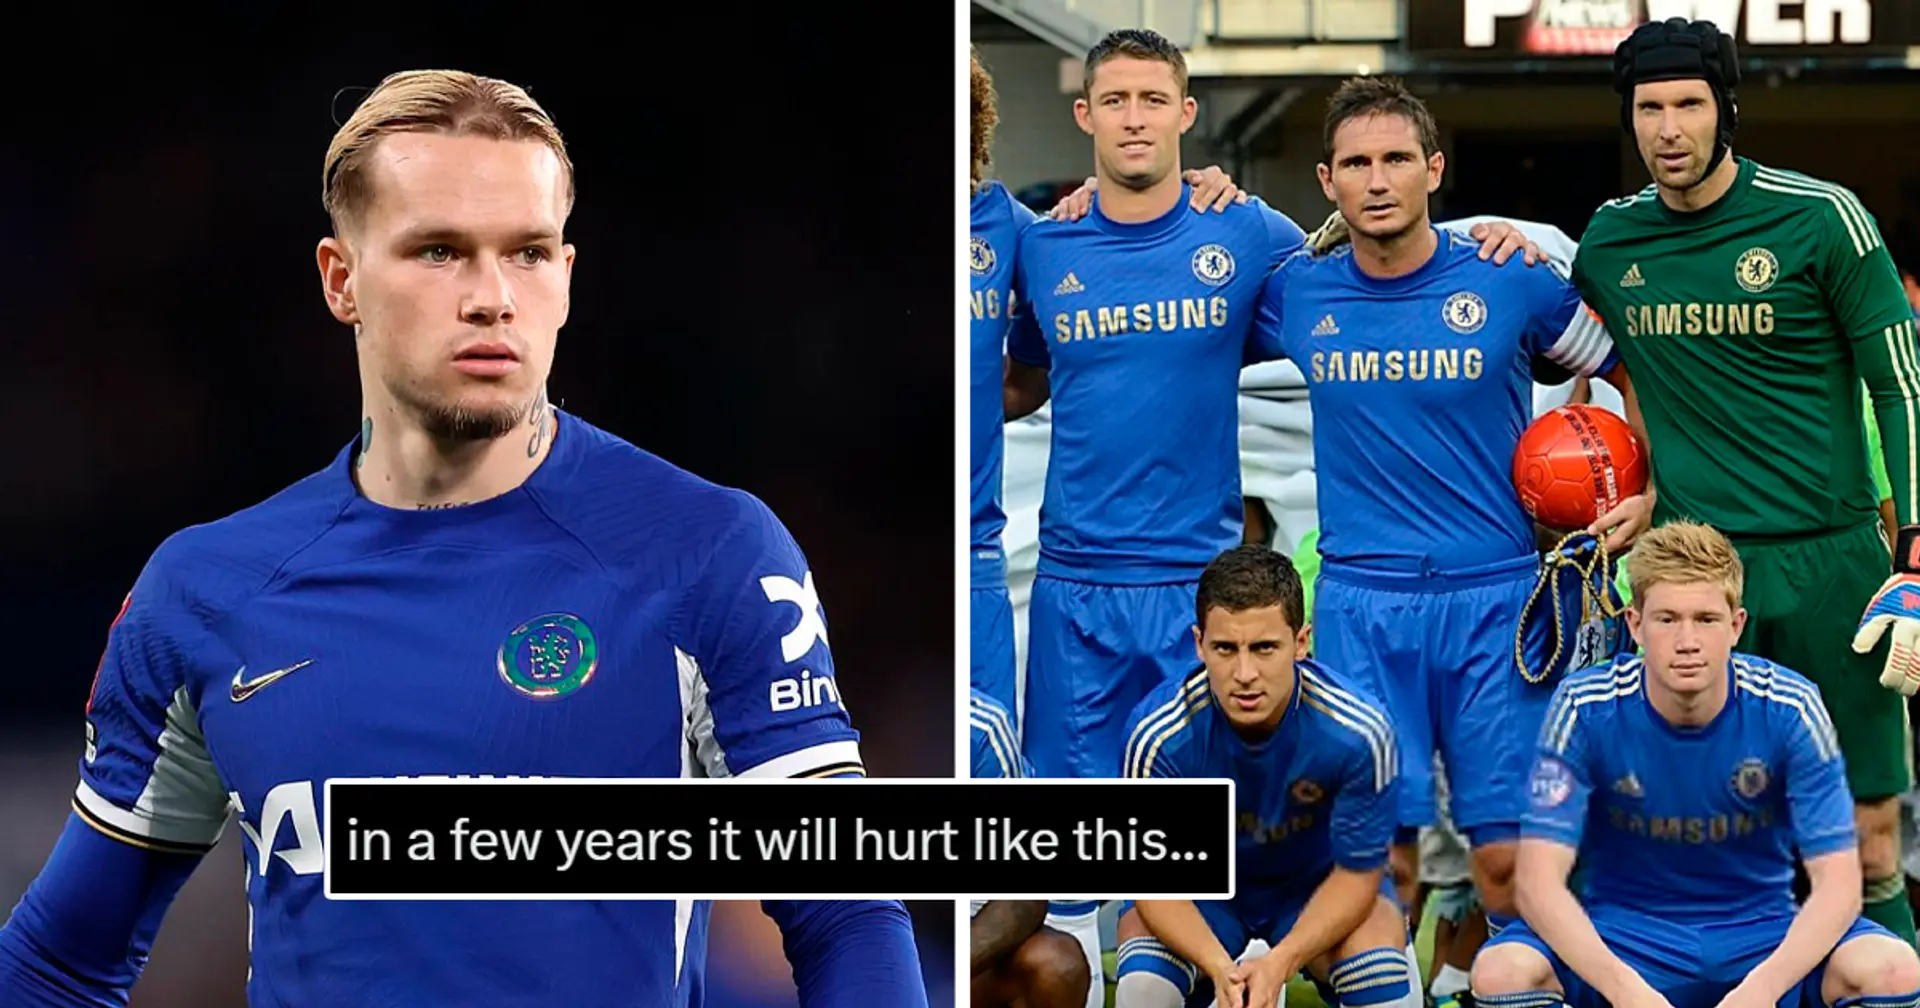 'If we sell Mudryk this season, it will hurt like this': an interesting analogy from a Chelsea fan went viral